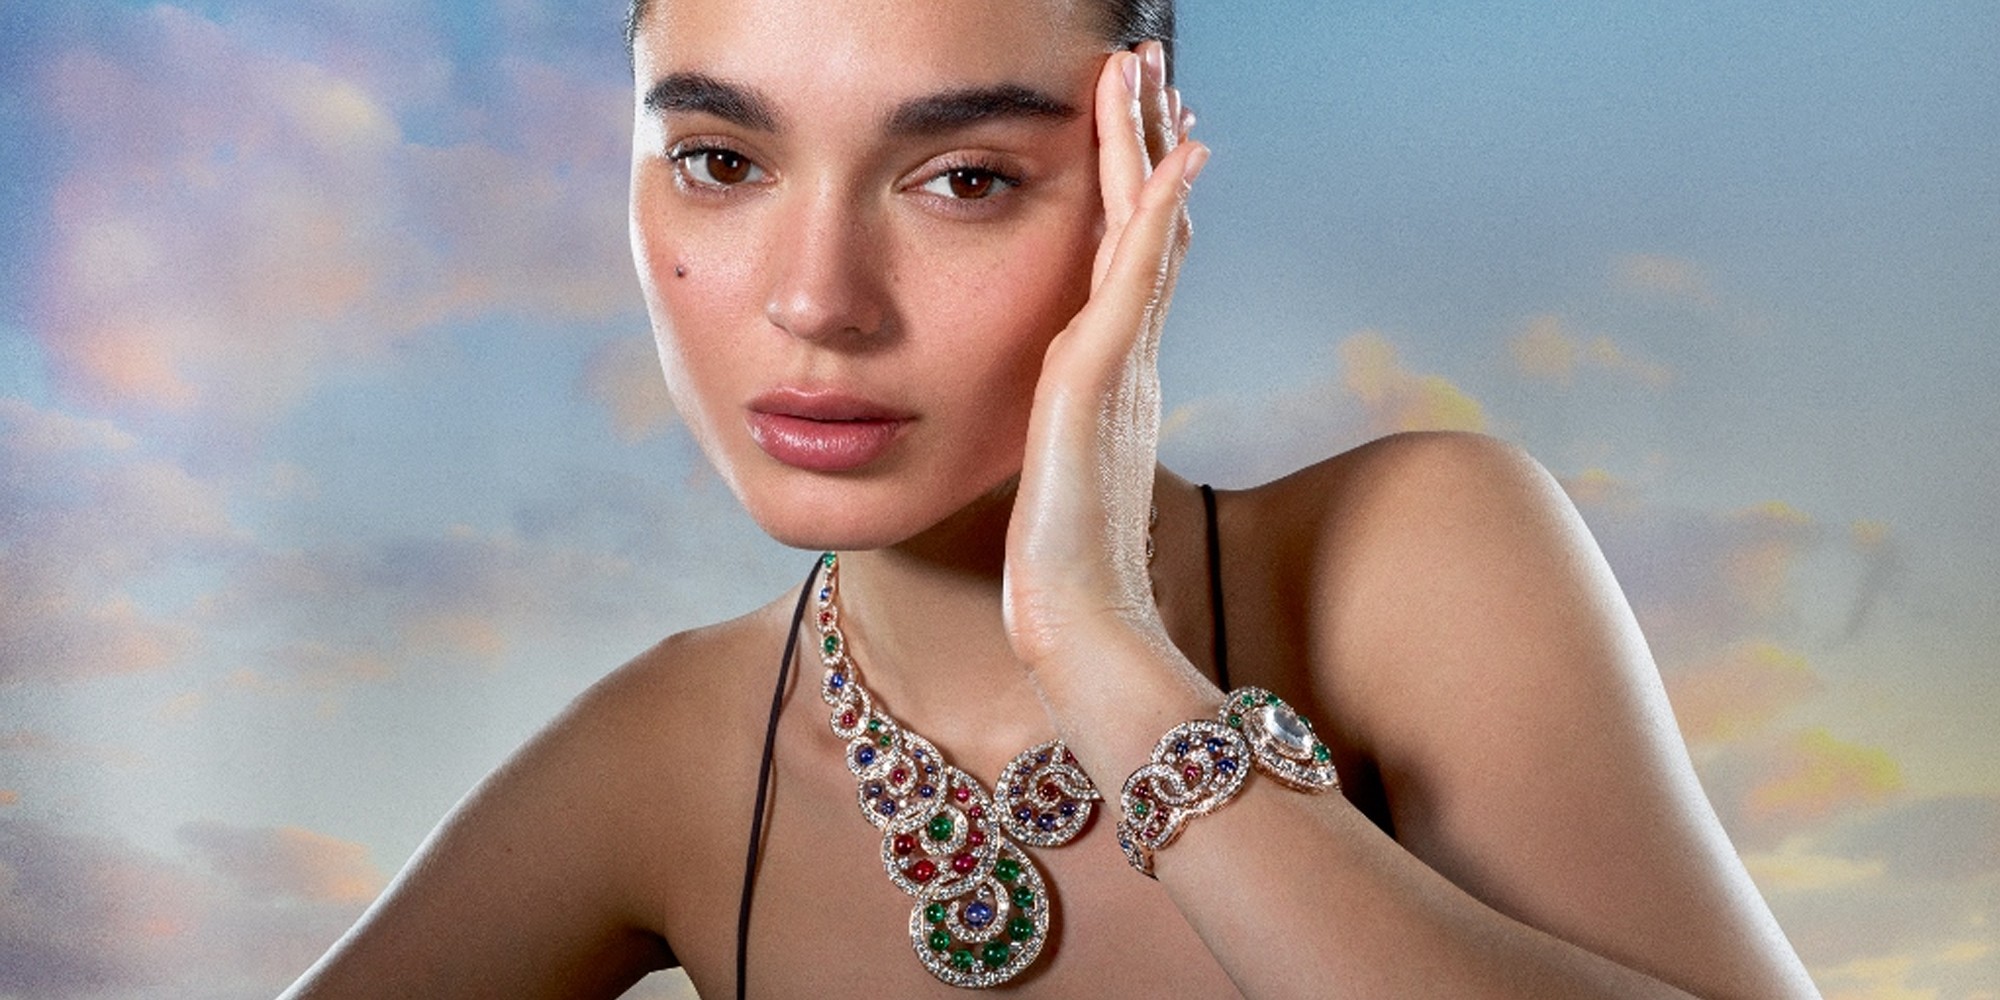 Unveiling the 2021 Bulgari Magnifica high jewelry collection, the